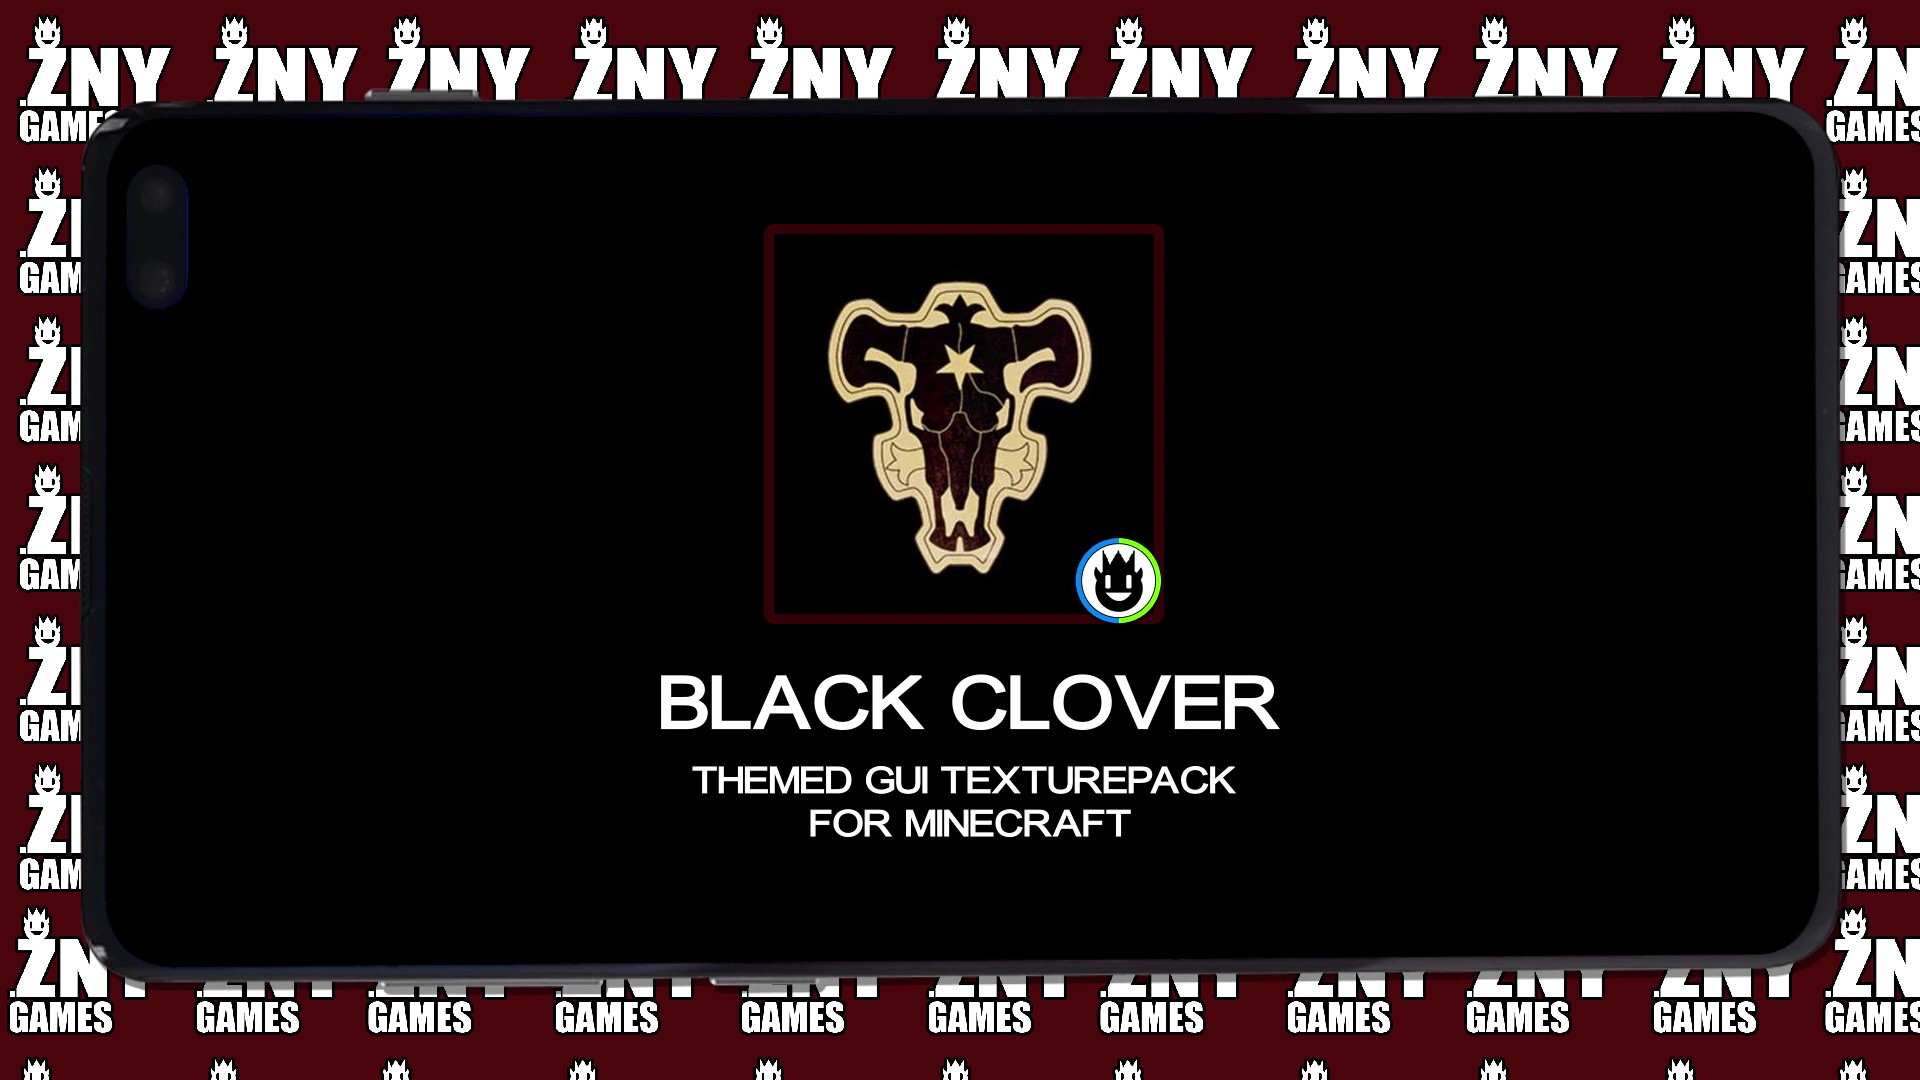 znygames themed gui texturepack black clover pocket edition - cover